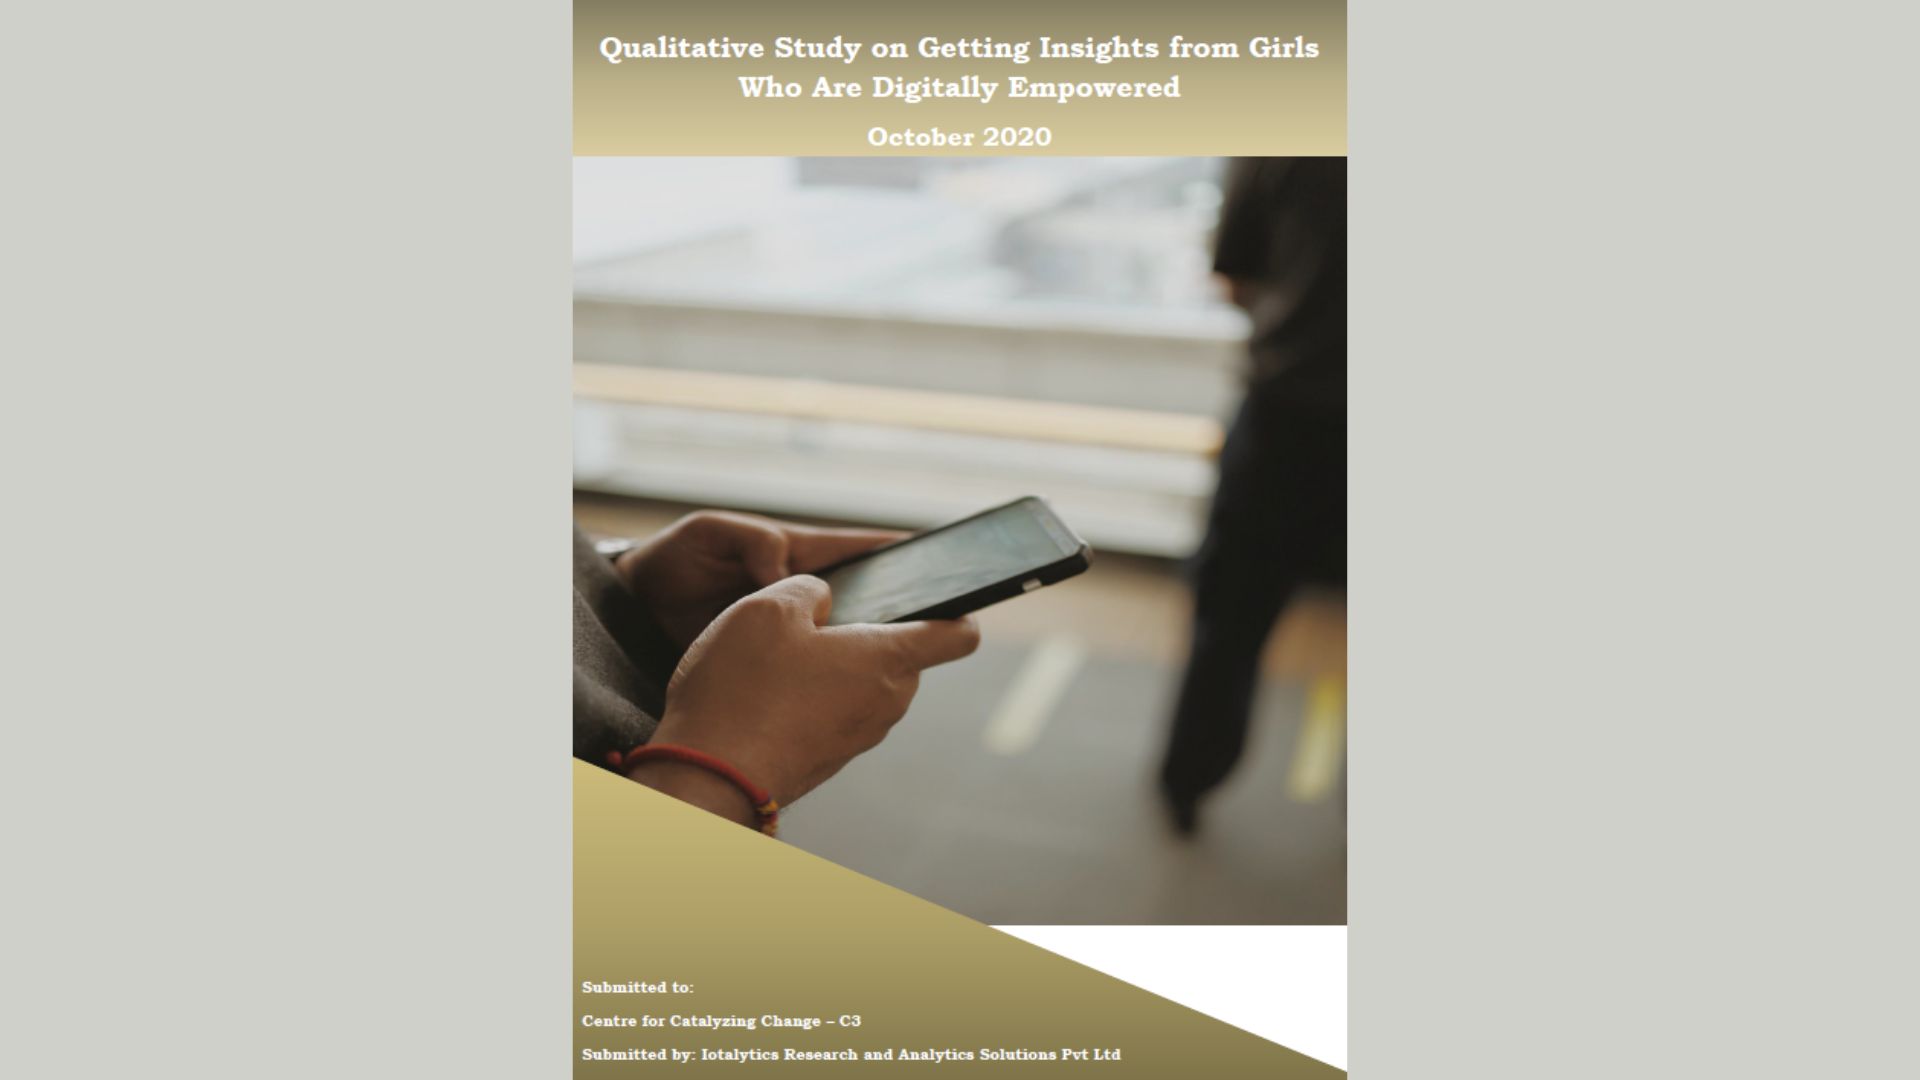 Qualitative Study on Getting Insights from Girls Who are Digitally Empowered